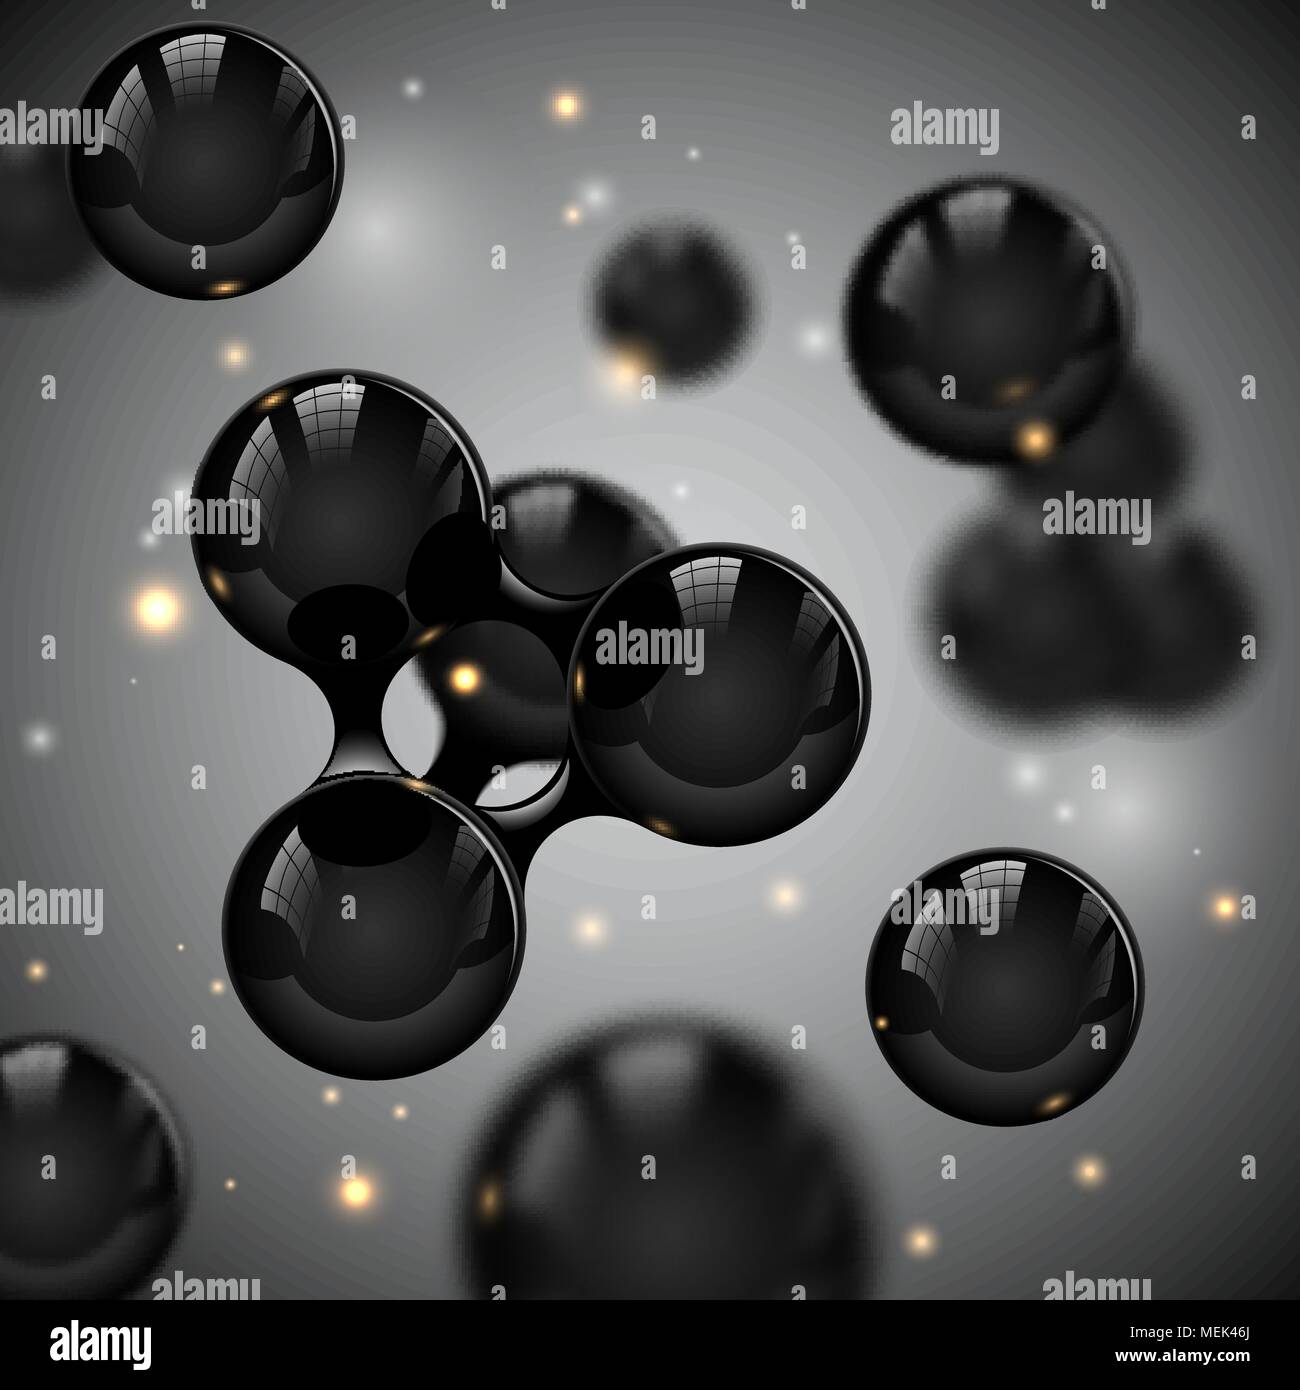 Vector abstract black glossy molecules design. Atoms with glow light sparks illustration. Medical background for science banner or flyer. Molecular Stock Vector